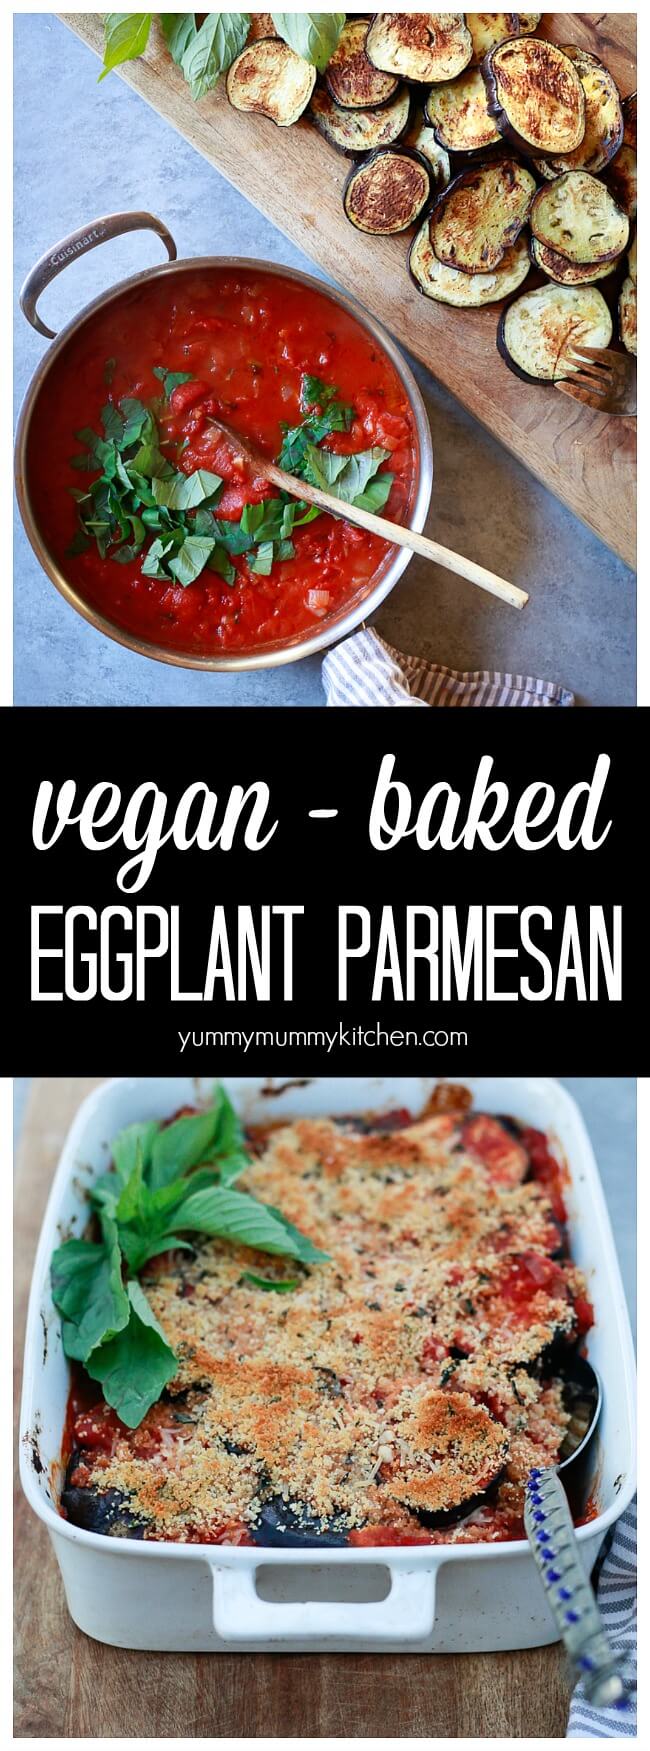 How to make vegan eggplant parmesan. This easy, healthy, baked vegan Eggplant Parmesan recipe makes a great Italian family dinner. 